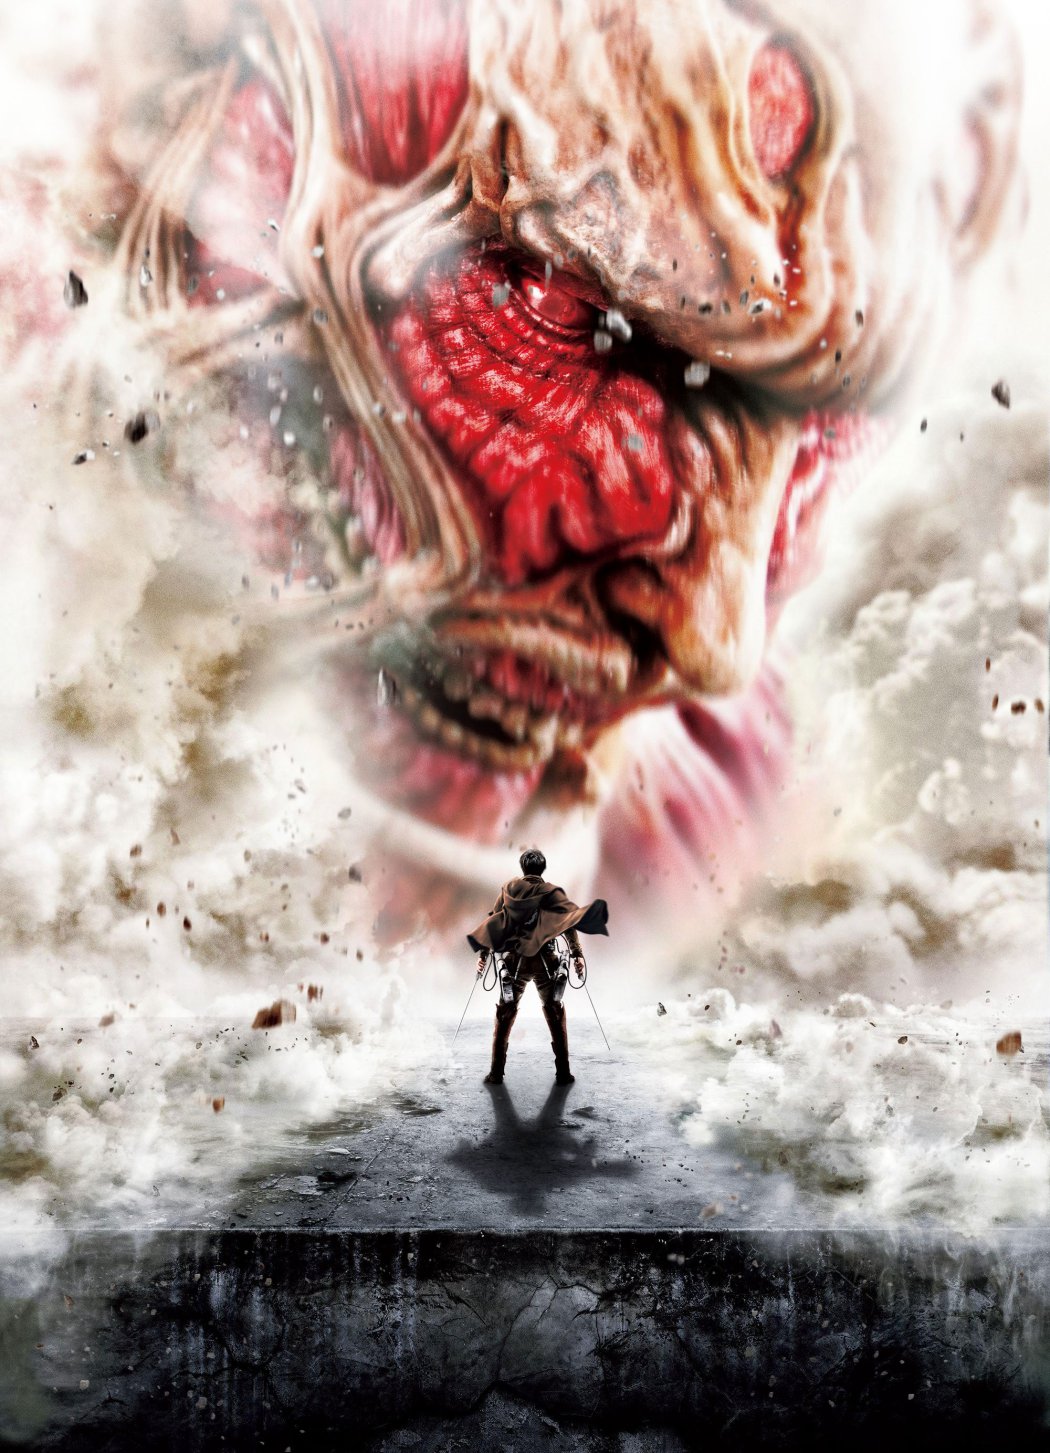 Attack on Titan live action movie visual